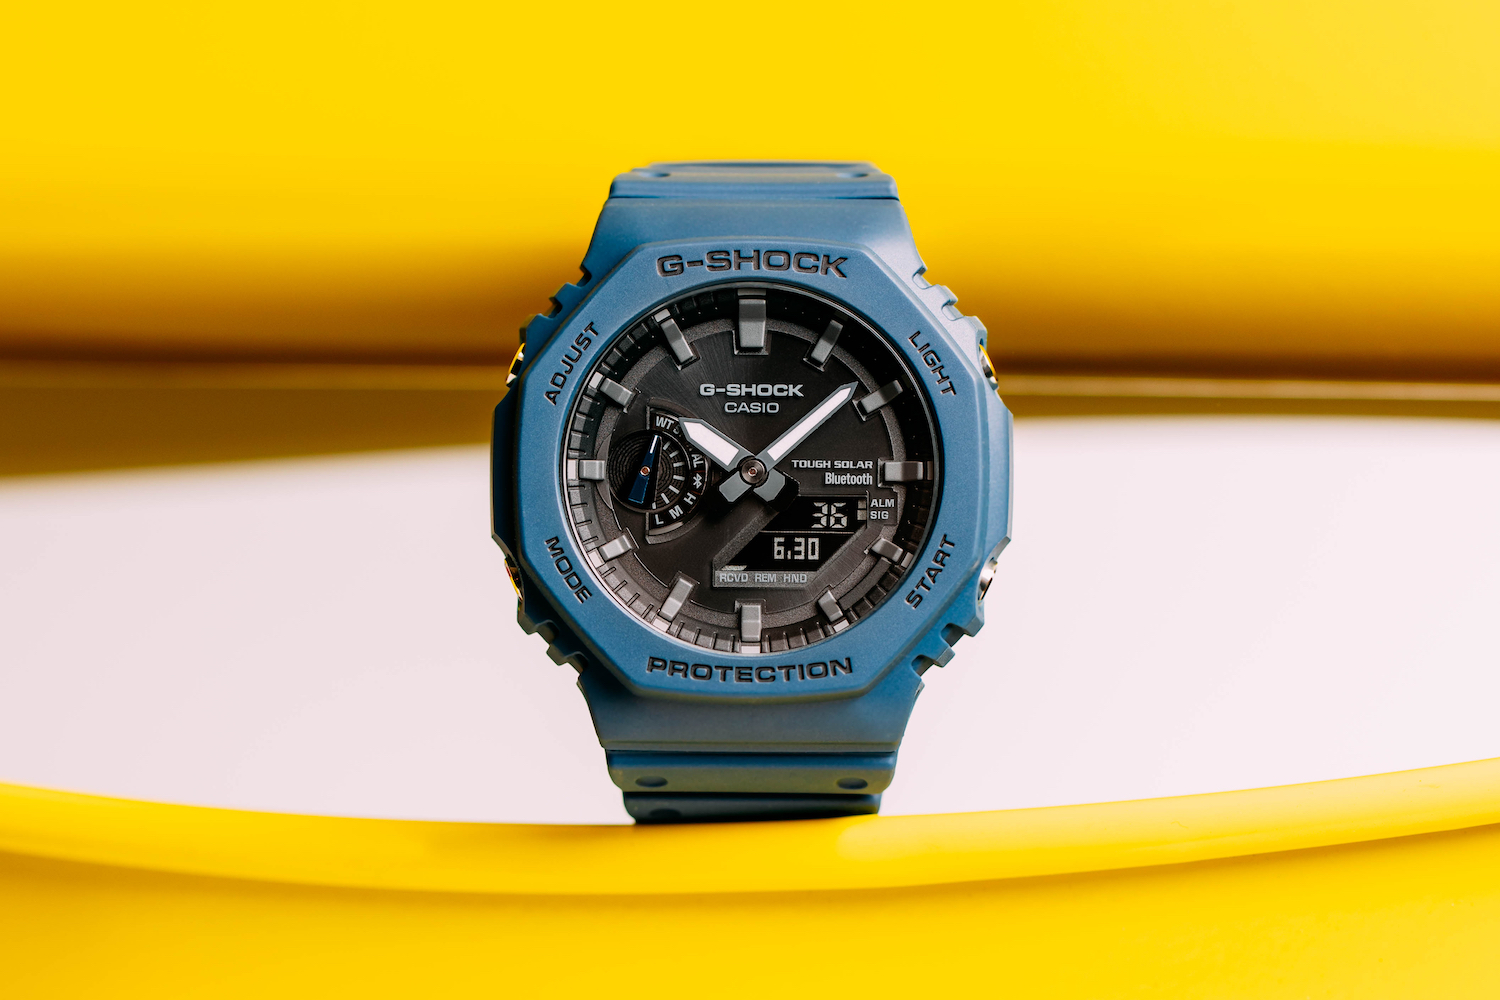 Casio G-Shock GA-2100 is one of the four most iconic models